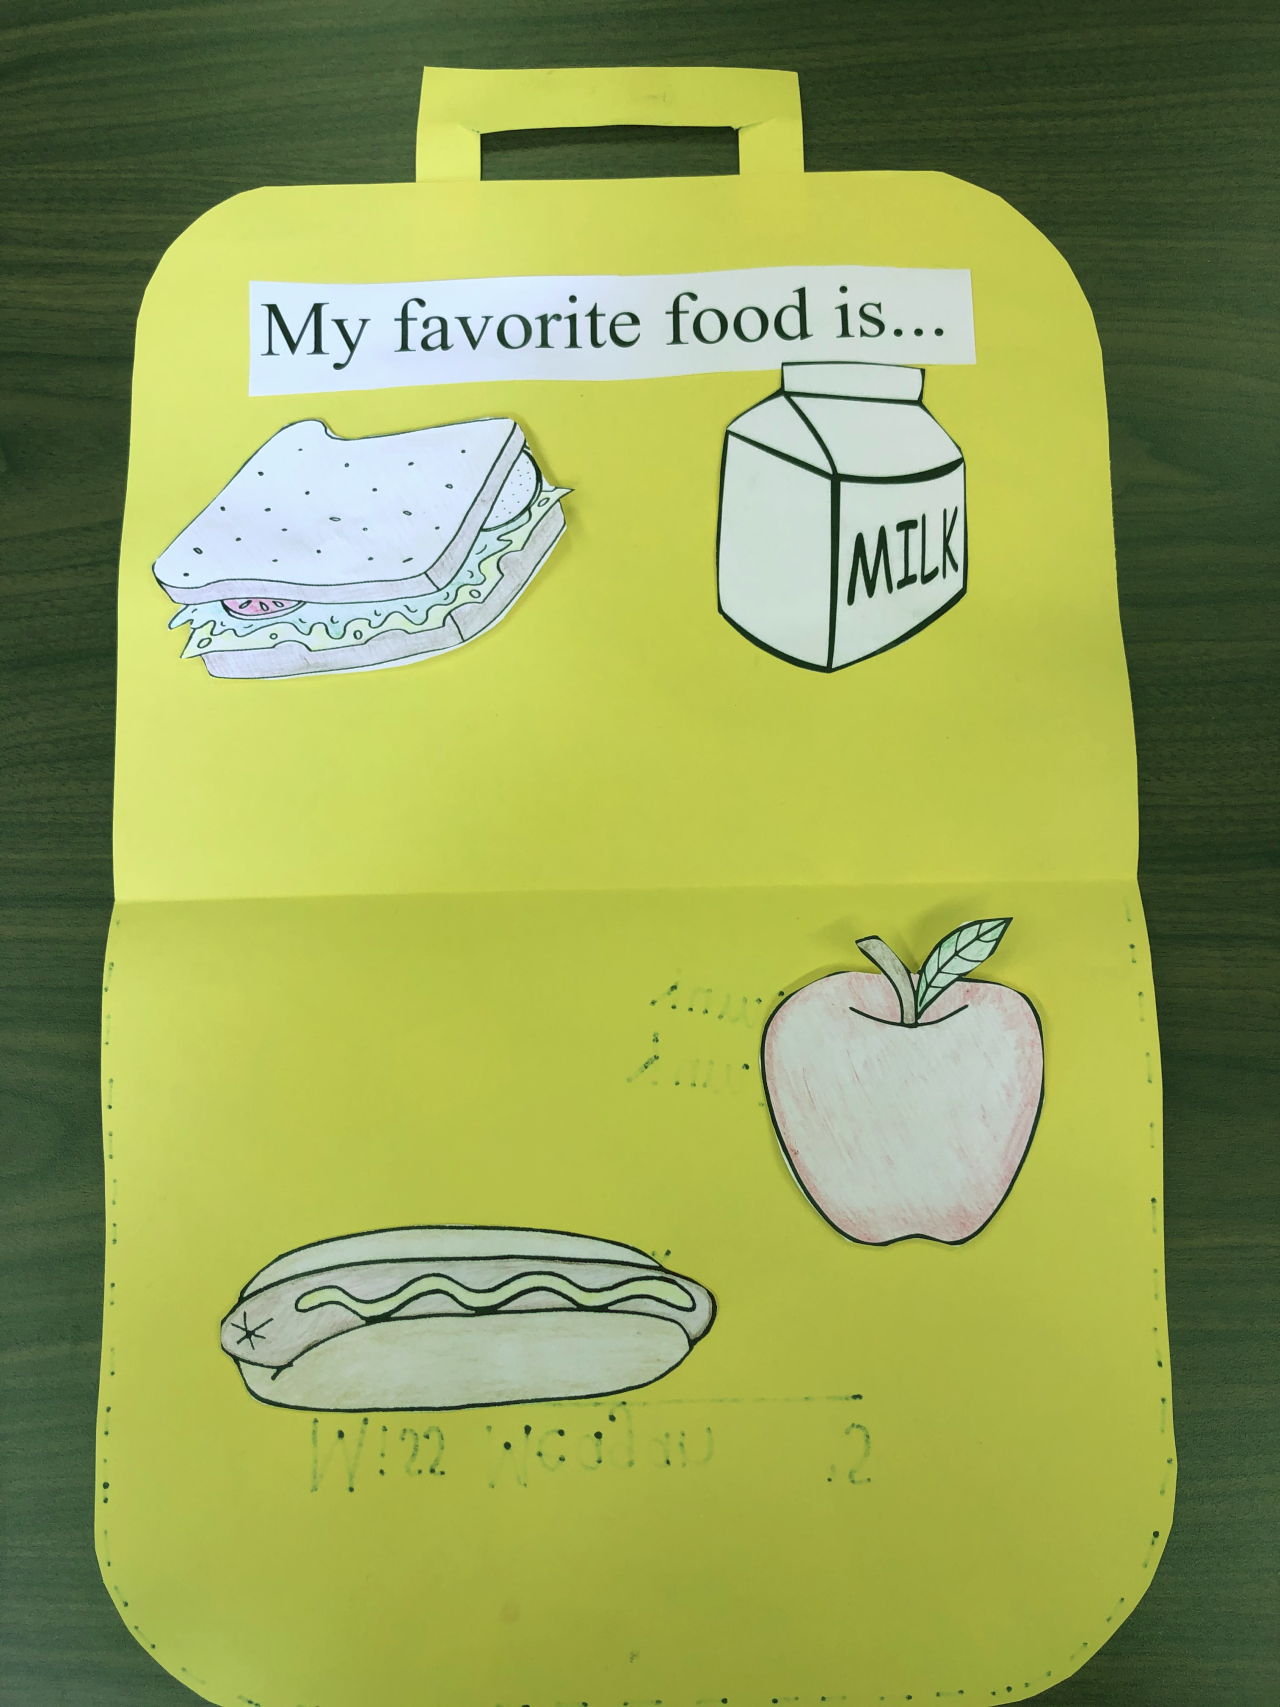 The lunchbox unfolded with "My favorite food" written at the top and a cut out of a carton of milk, a sandwich, an apple, and a hot dog